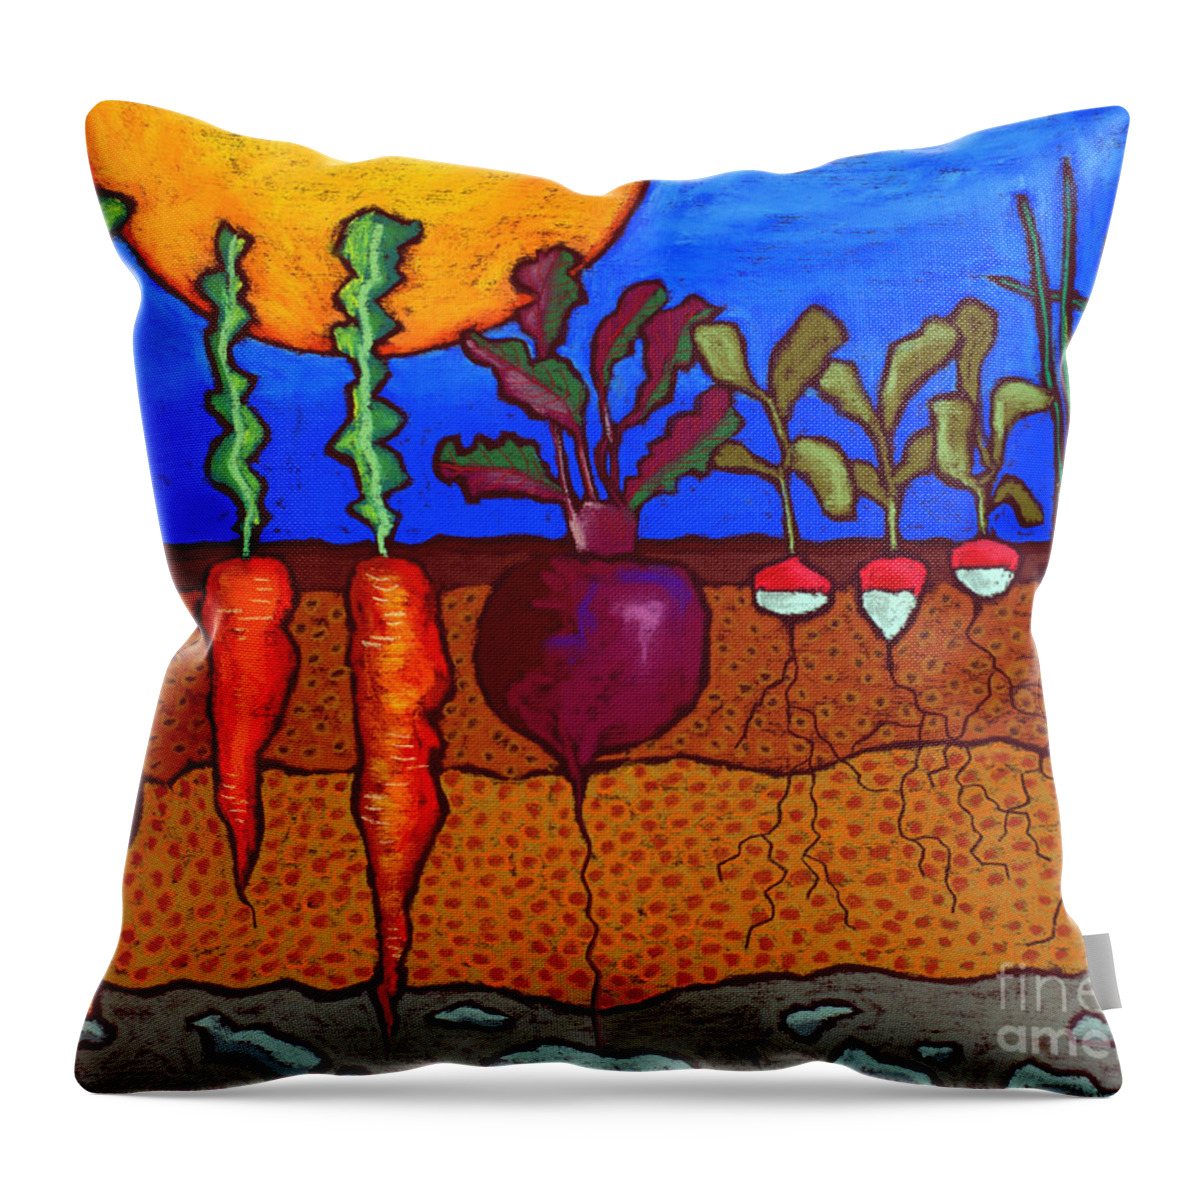 Vegetables Throw Pillow featuring the painting In The Ground by David Hinds